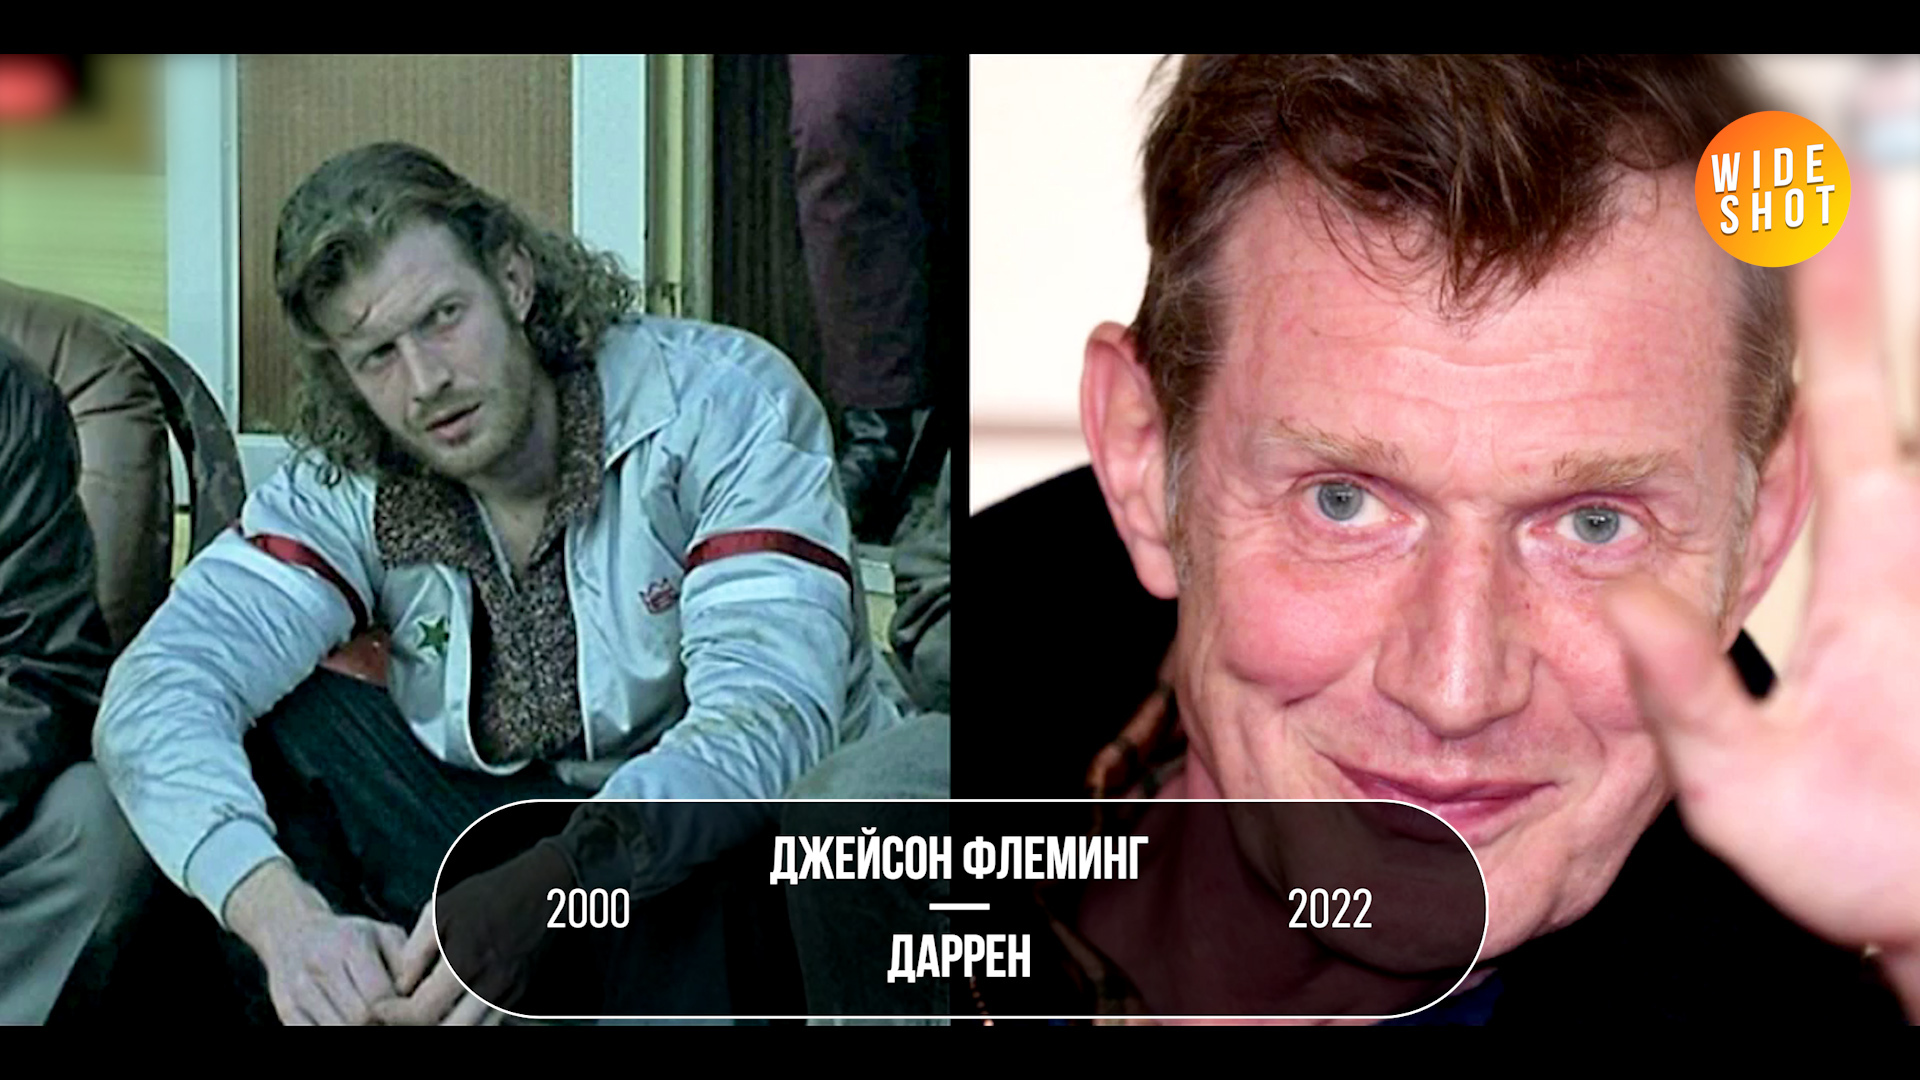 BIG JACKPOT (2000): ACTORS THEN AND NOW (22 YEARS LATER!) - Hollywood, Actors and actresses, Video review, Movies, Guy Ritchie, Big jackpot, Crime films, Comedy, 2000s, Dmitry Puchkov, I advise you to look, It Was-It Was, Celebrities, What to see, Video, Youtube, Longpost, 